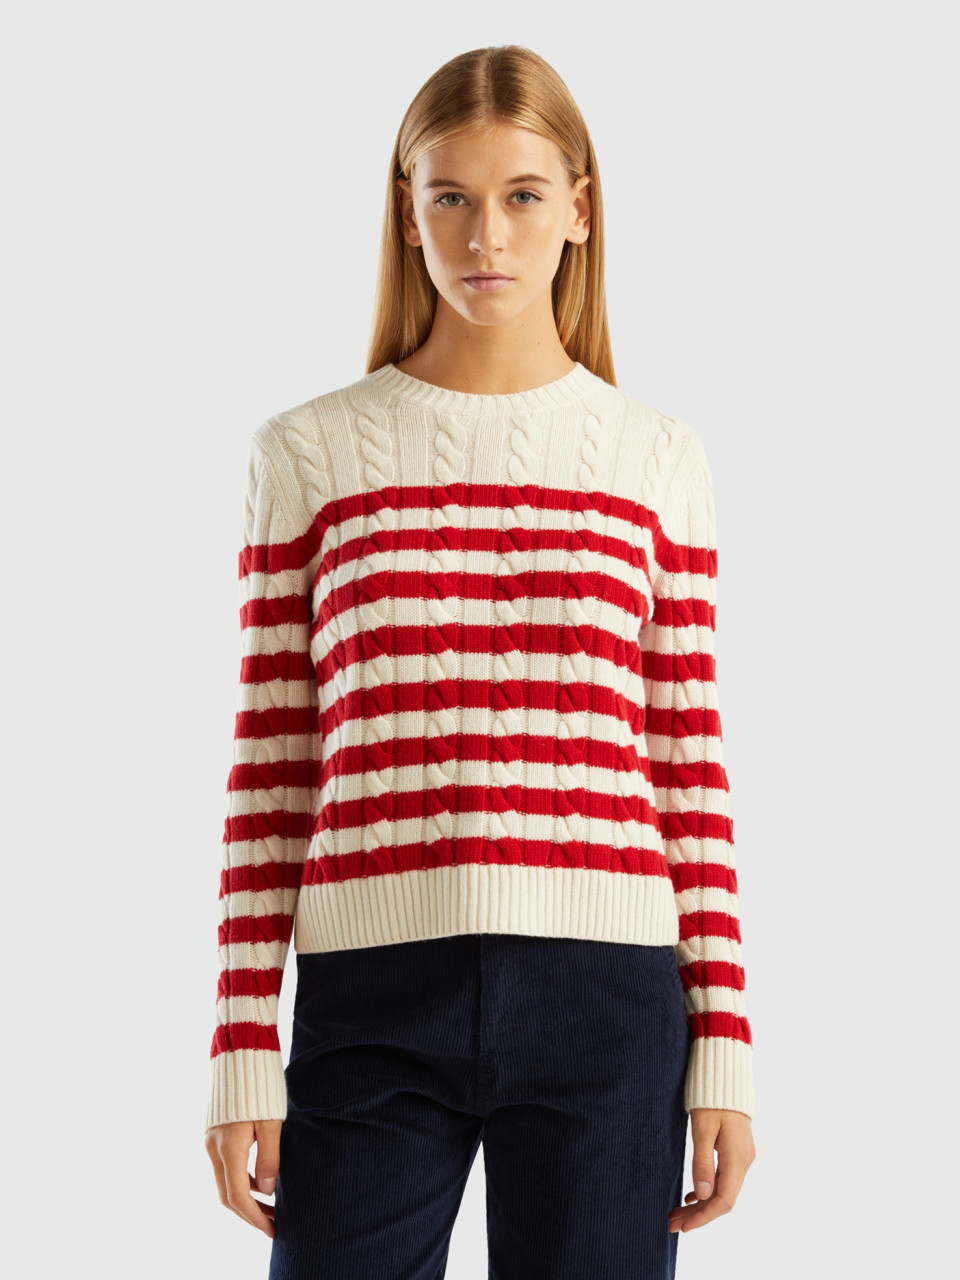 Benetton, Striped Sweater With Cables, Red, Women